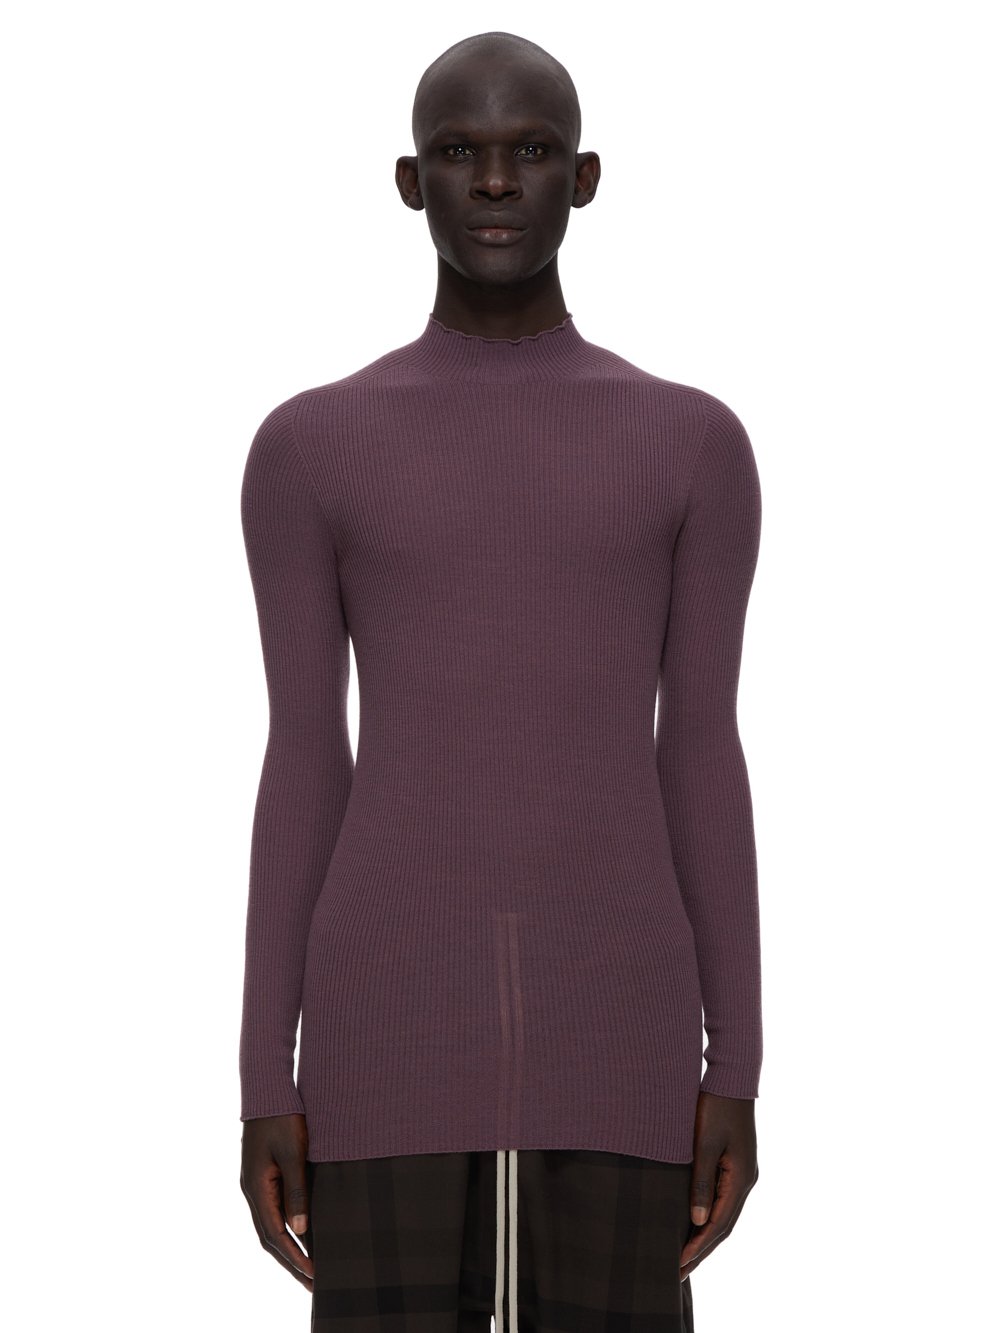 RICK OWENS FW23 LUXOR RIBBED LUPETTO IN AMETHYST PURPLE LIGHTWEIGHT RIBBED KNIT